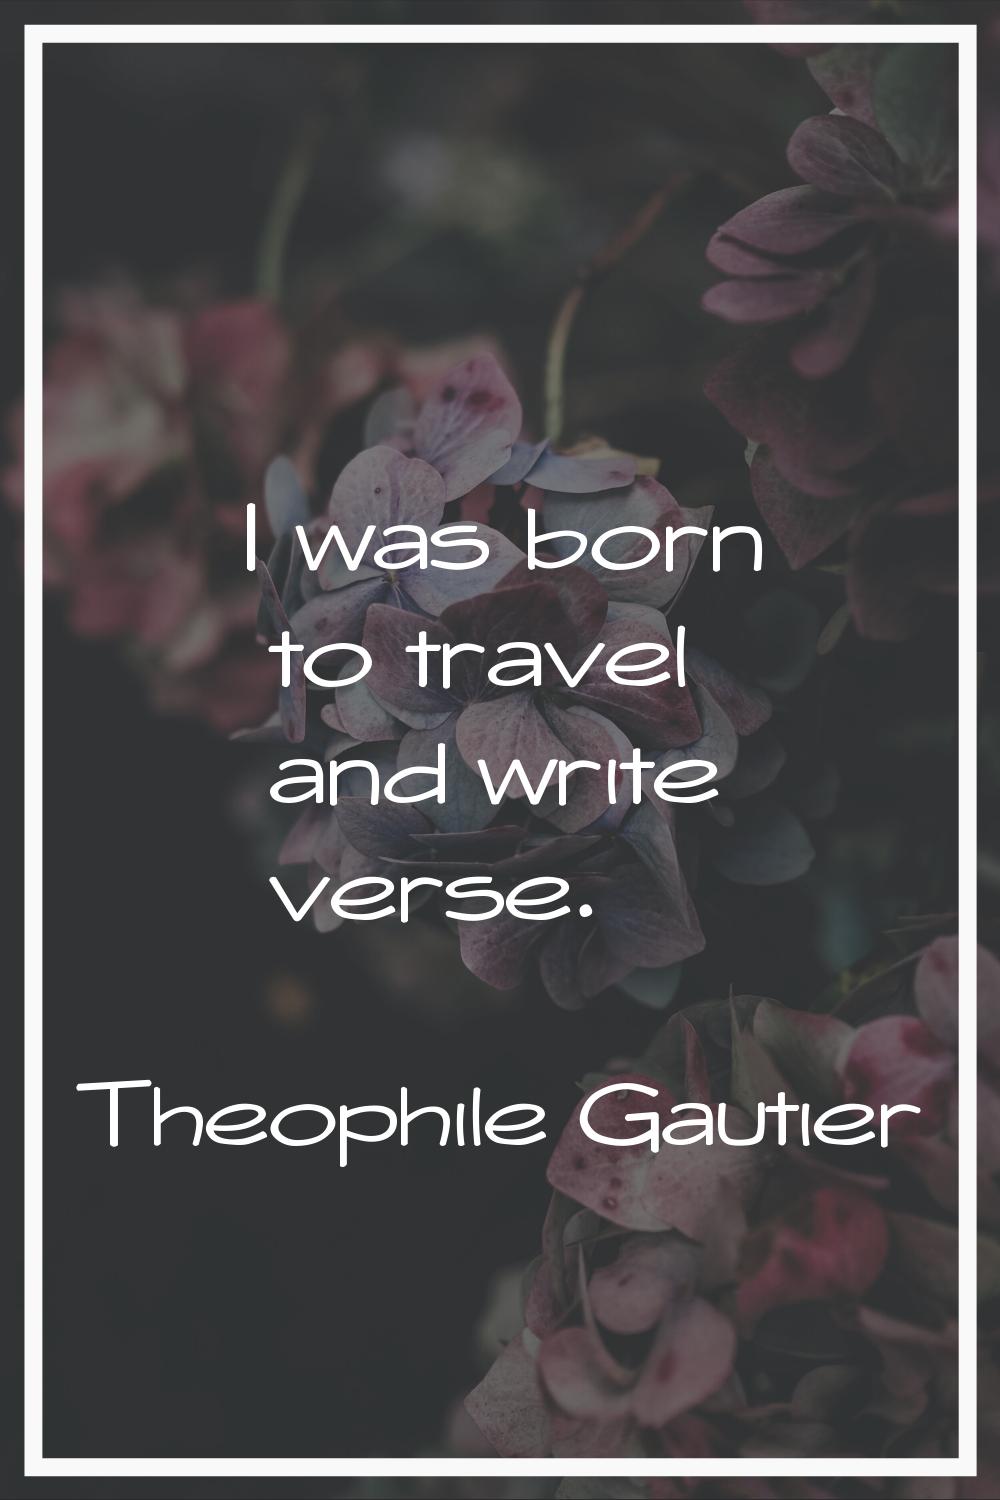 I was born to travel and write verse.